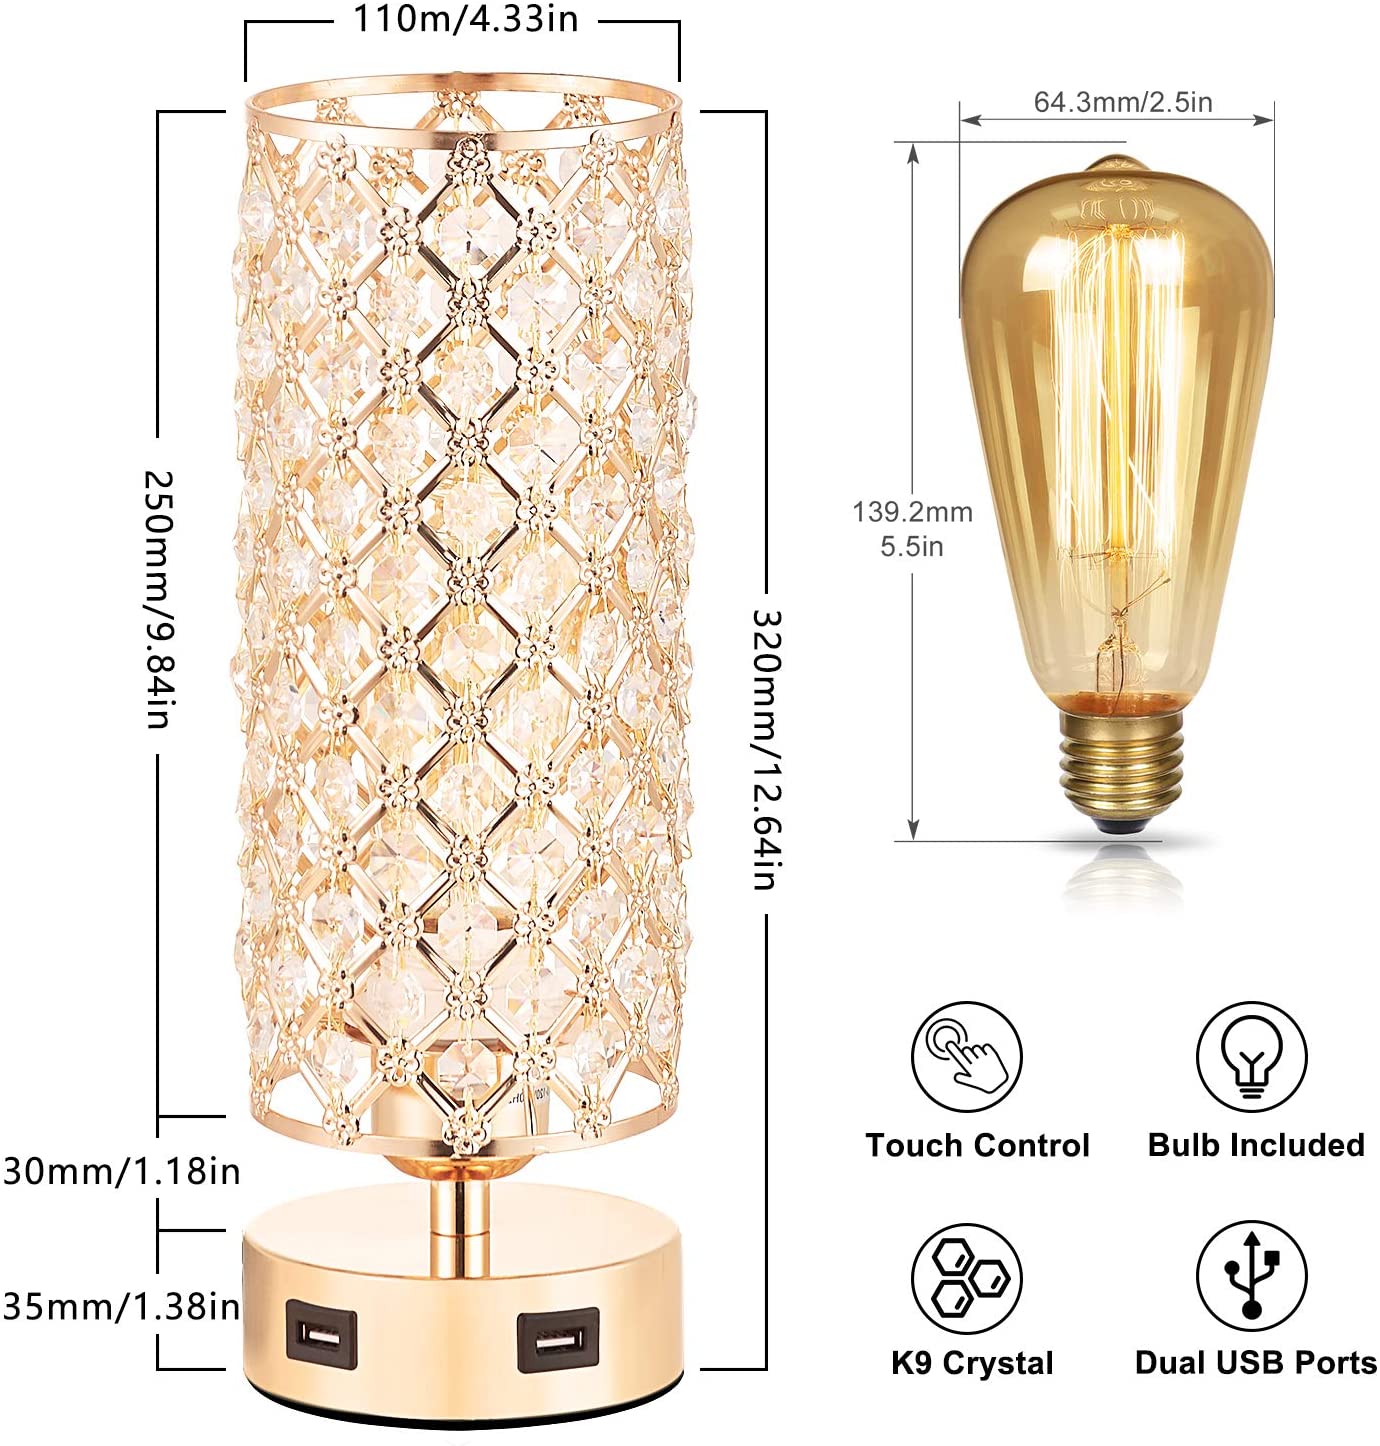 Touch Control USB Crystal Small Lamp, Dimmable Nightstand Lamp with Dual USB Port, 3-Way Gold Crystal Lamp with Bulb, Bedside Desk Light for Bedroom Living Room Entryway Home Office(Bulb Included) - image 5 of 7